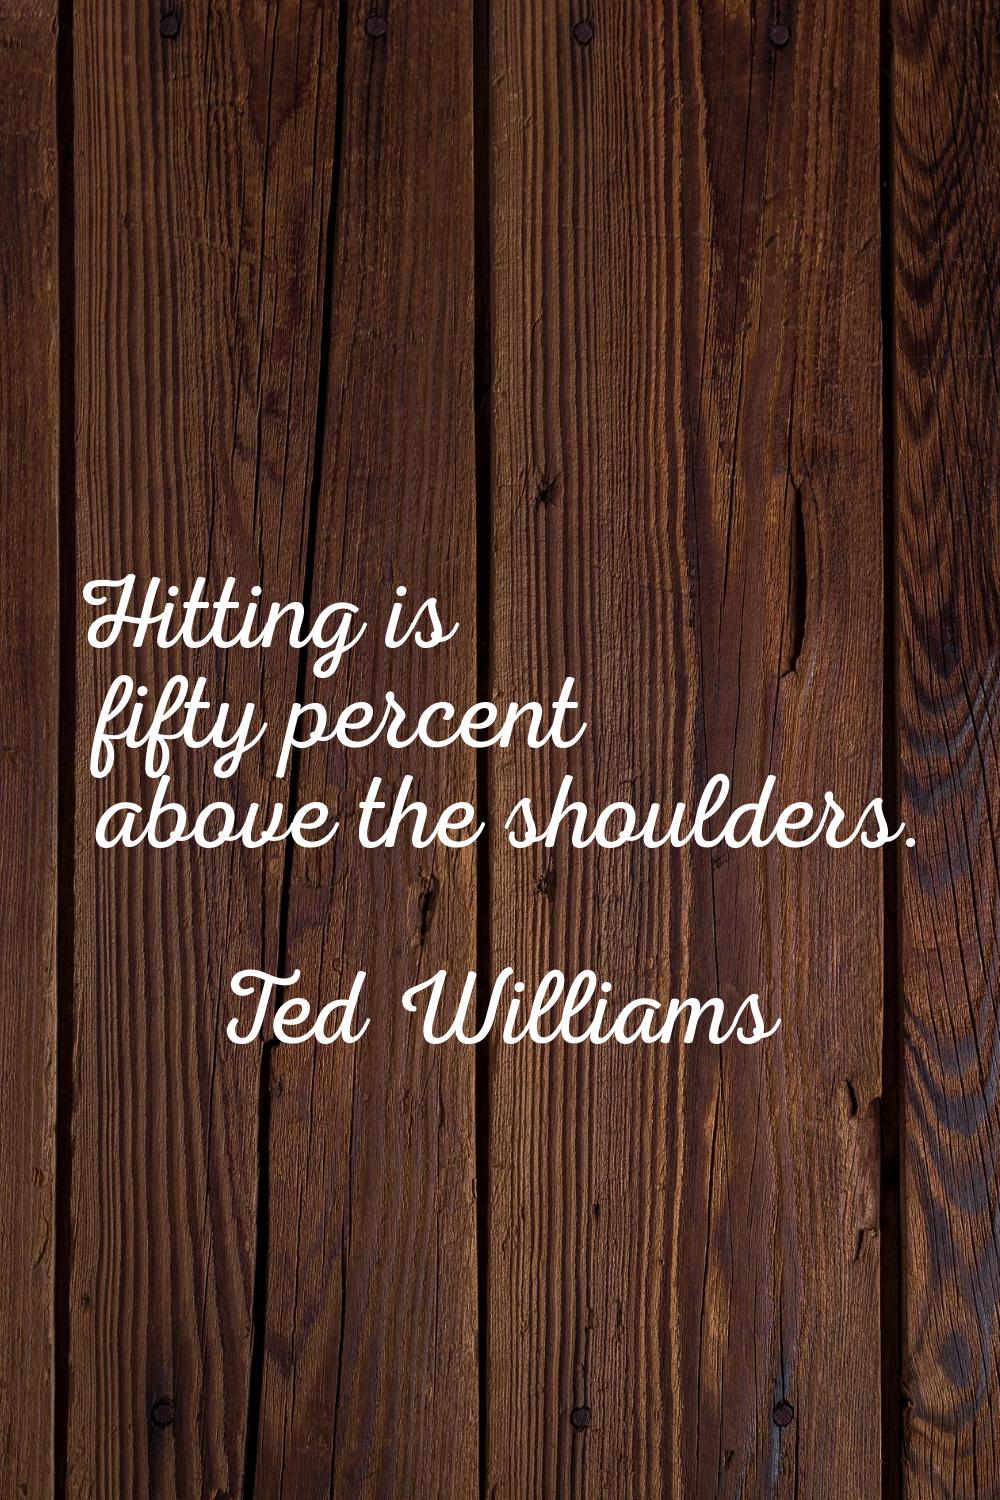 Hitting is fifty percent above the shoulders.